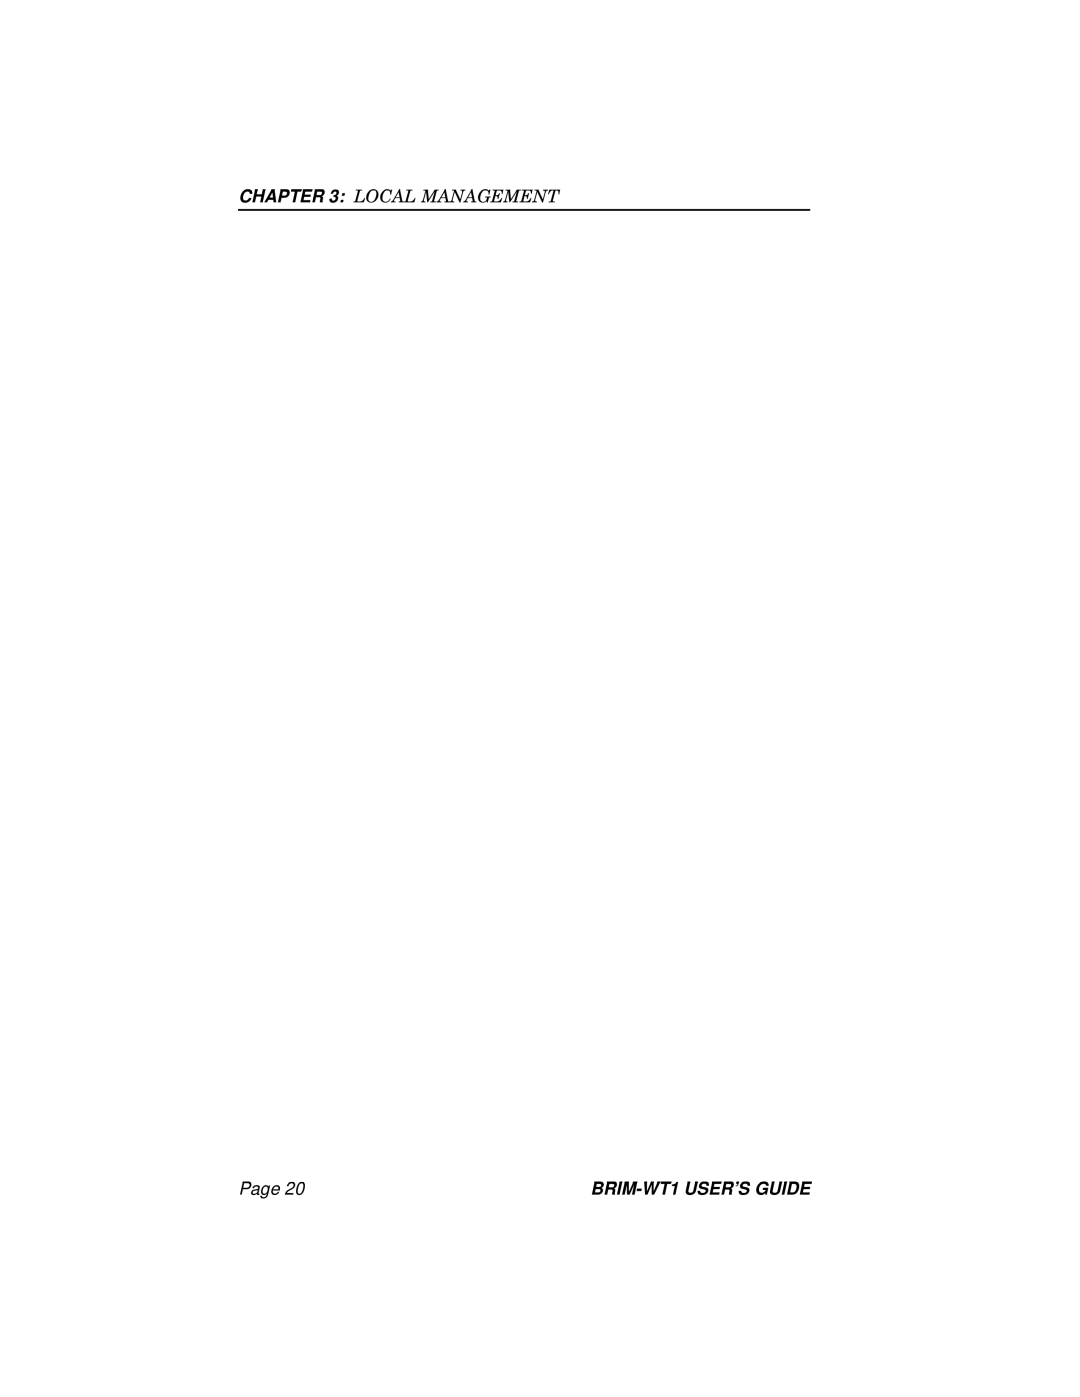 Cabletron Systems manual Local Management, Page, BRIM-WT1 USER’S GUIDE 